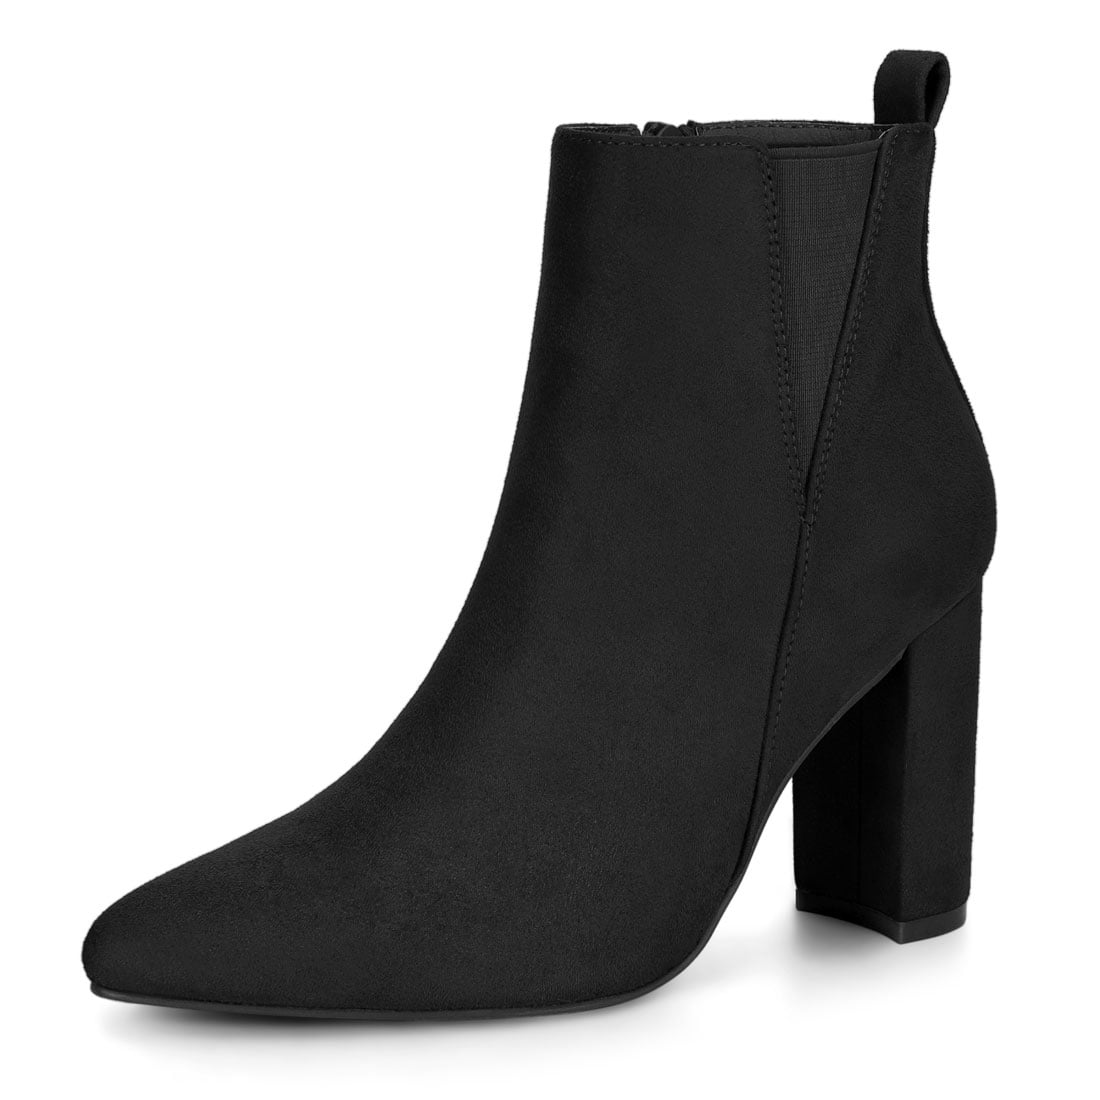 black pointed toe block heel ankle boots